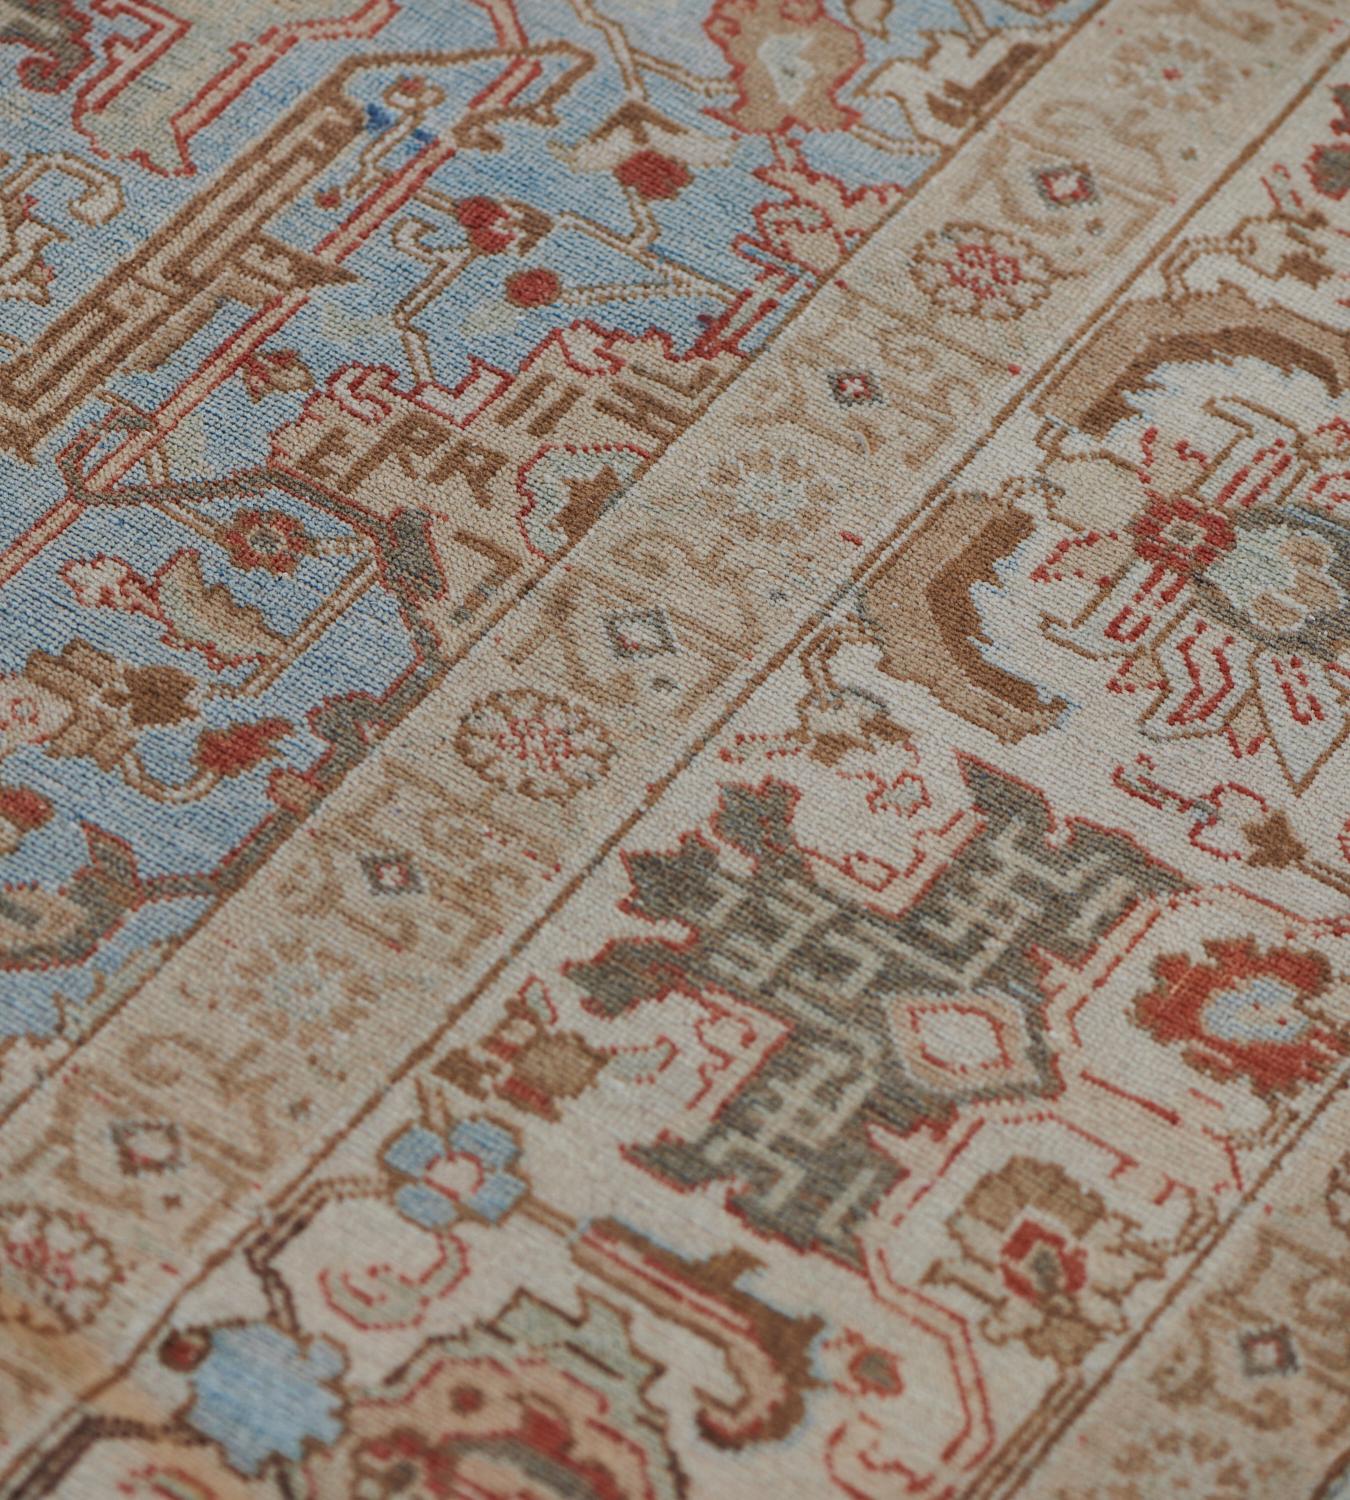 This antique, circa 1920, Tabriz rug has a light blue field with an overall design of light grey and ivory angular floral and leafy vine and brick-red and shaded chocolate-brown part palmettes, in a broad ivory border with ivory and light blue